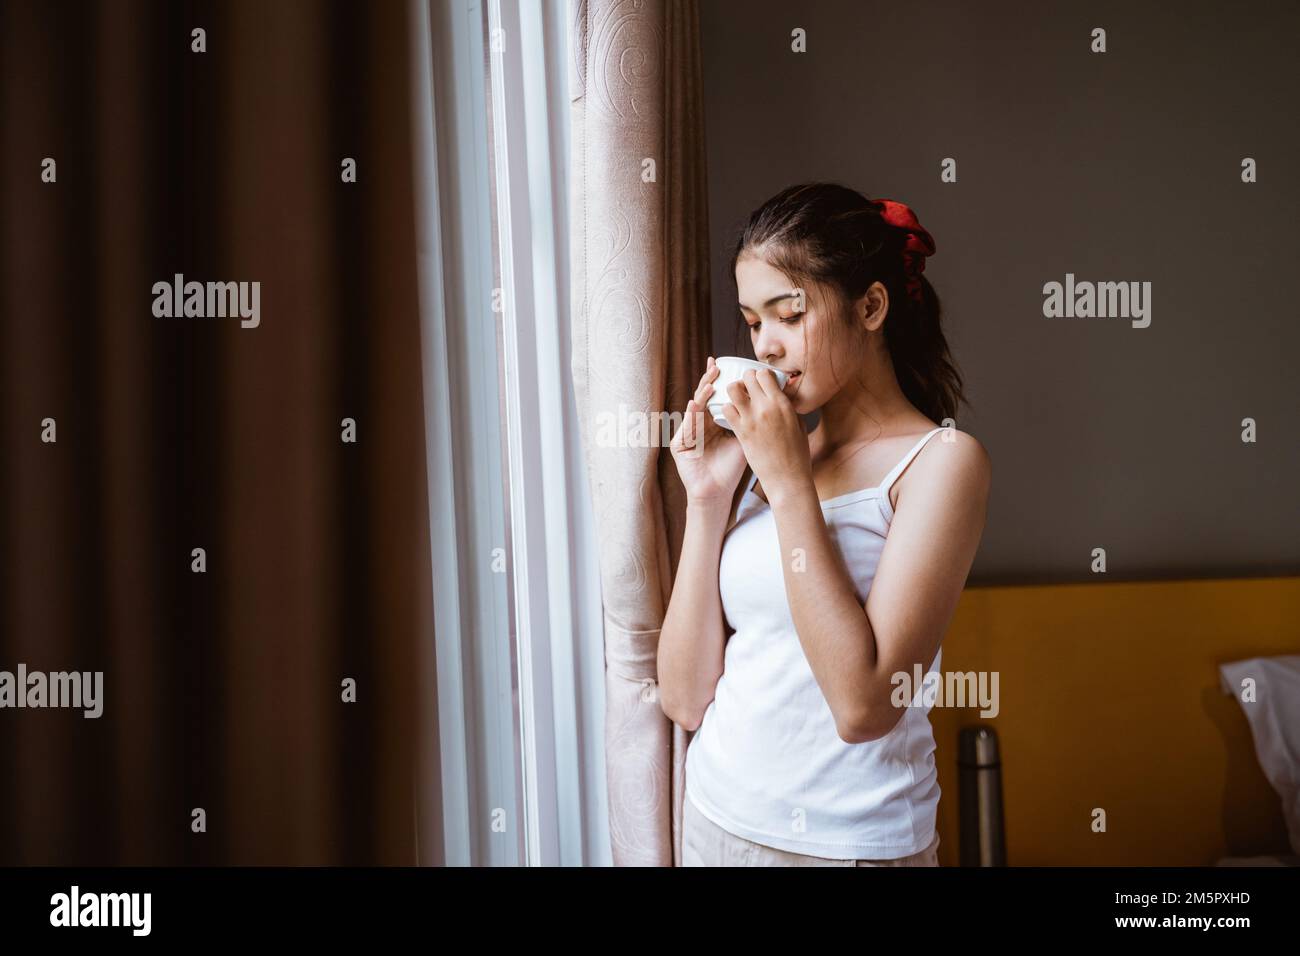 girl drinking coffee in front of the window Stock Photo